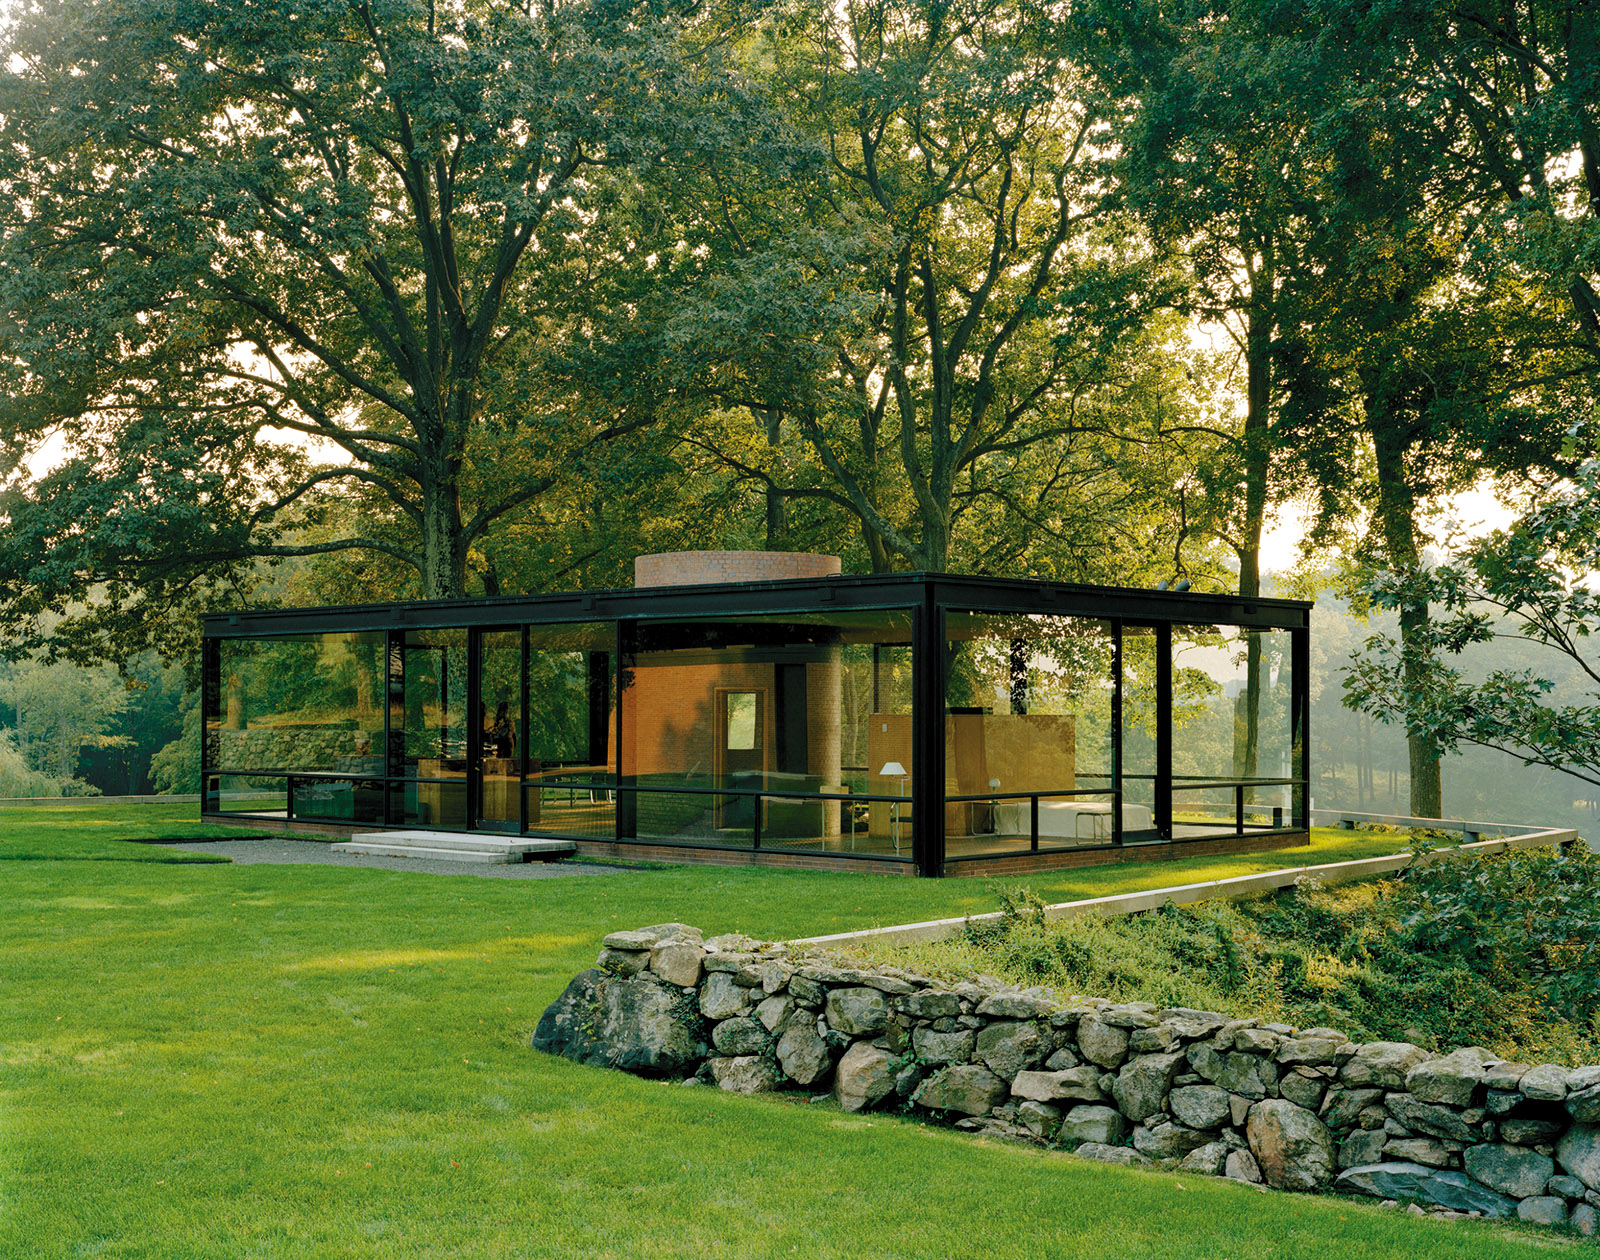 Philip Johnson’s Glass House, New Canaan, Connecticut